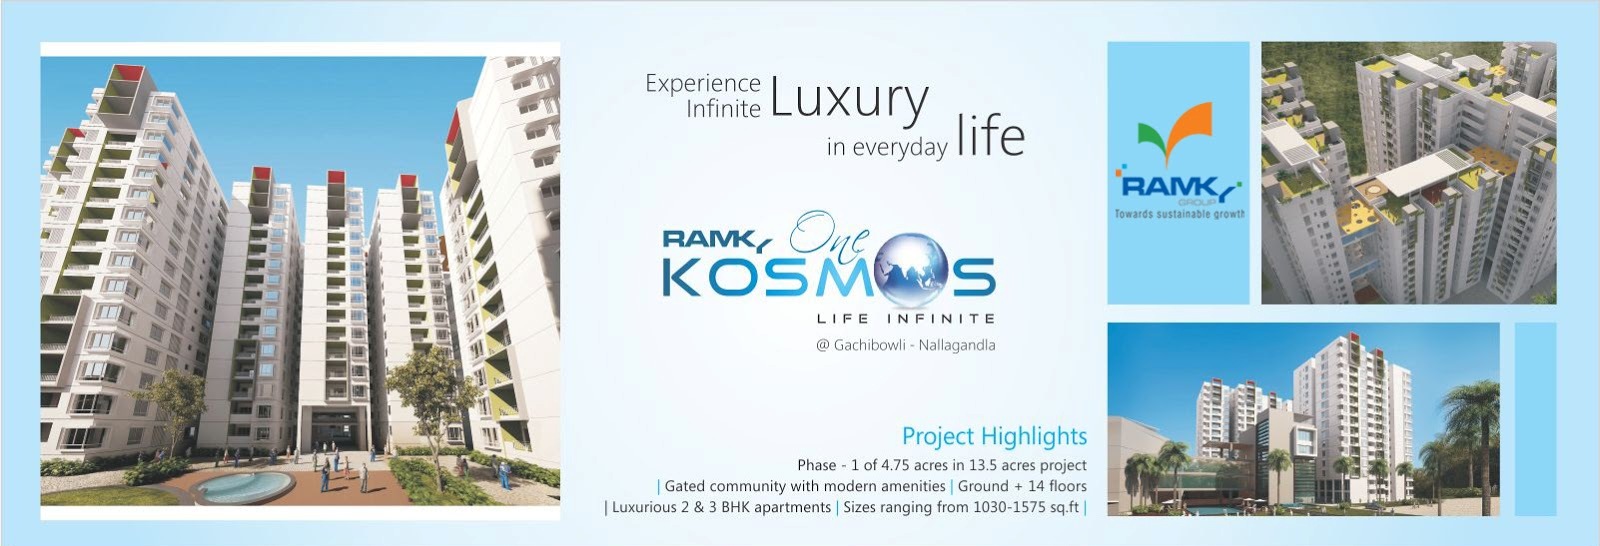 Ramky One Kosmos with a well developed social infrastructure and serene environment Update